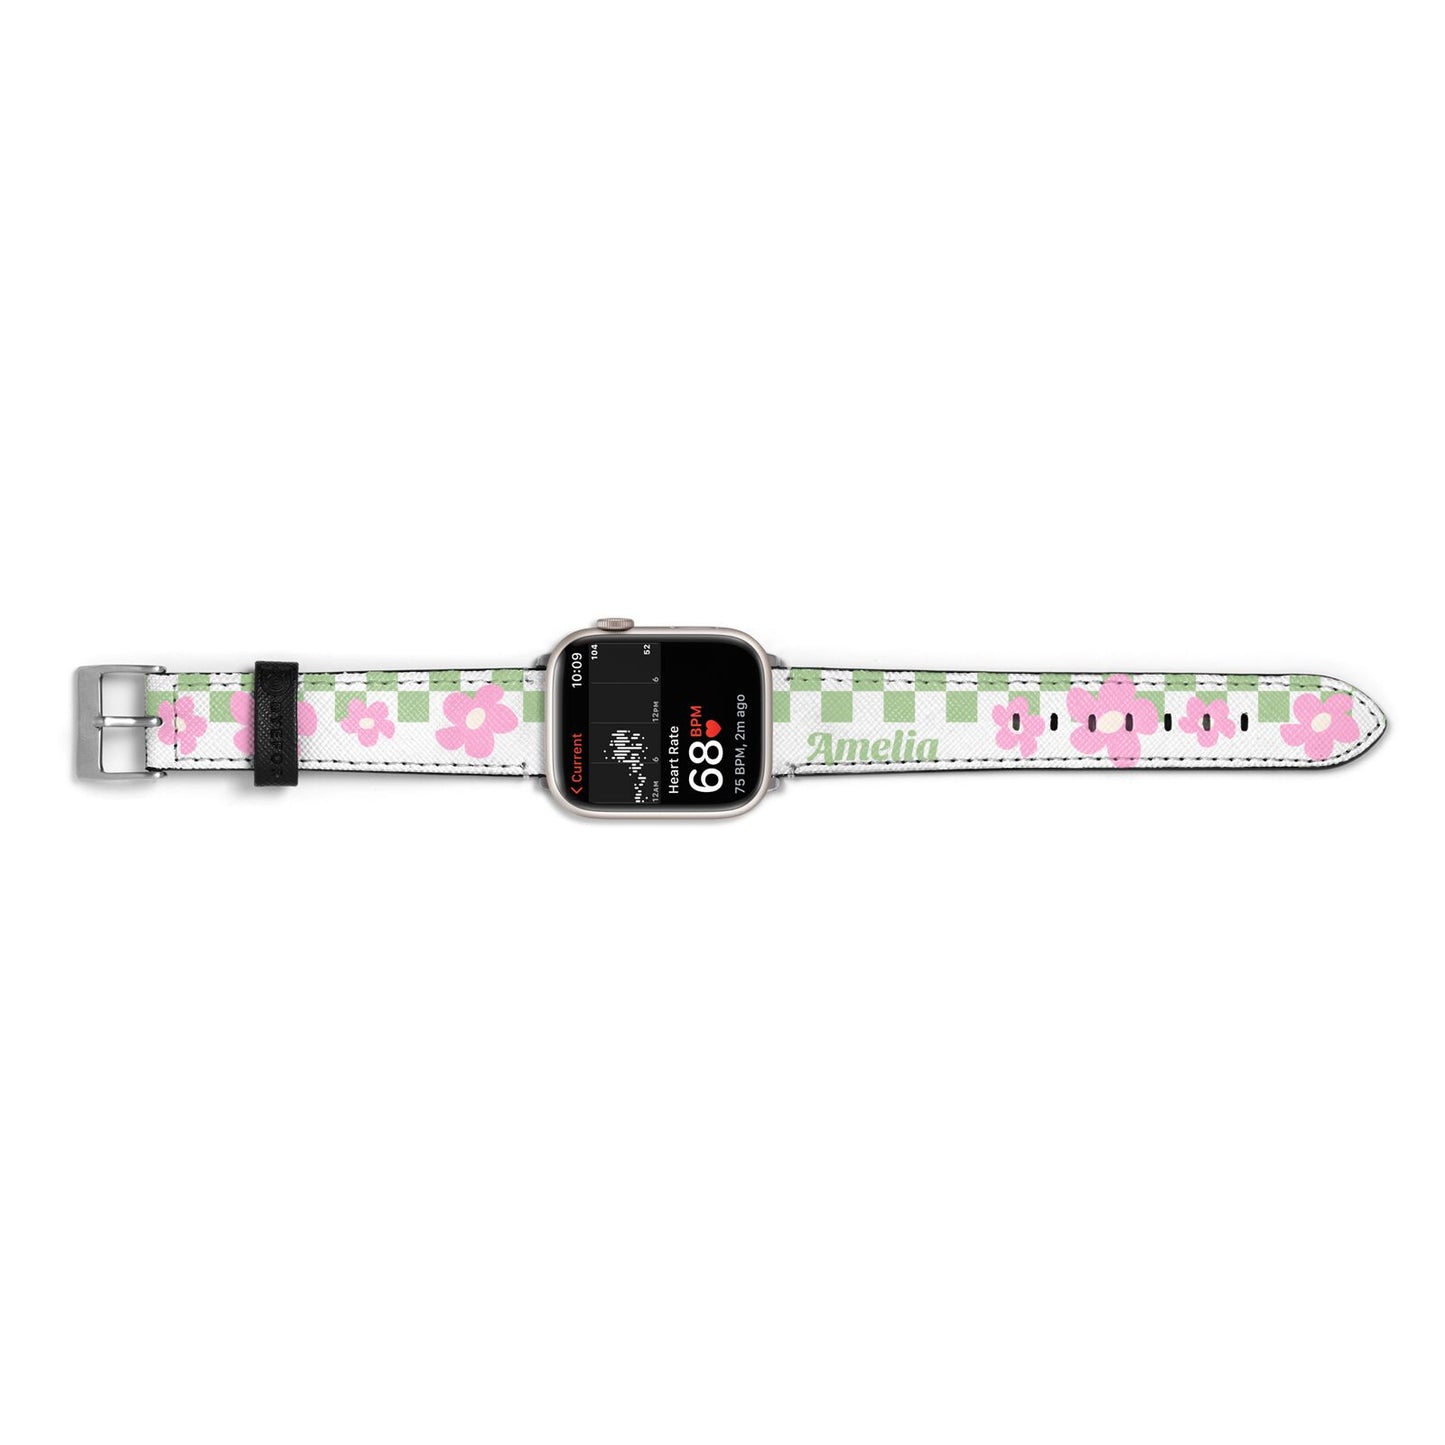 Personalised Check Floral Apple Watch Strap Size 38mm Landscape Image Silver Hardware